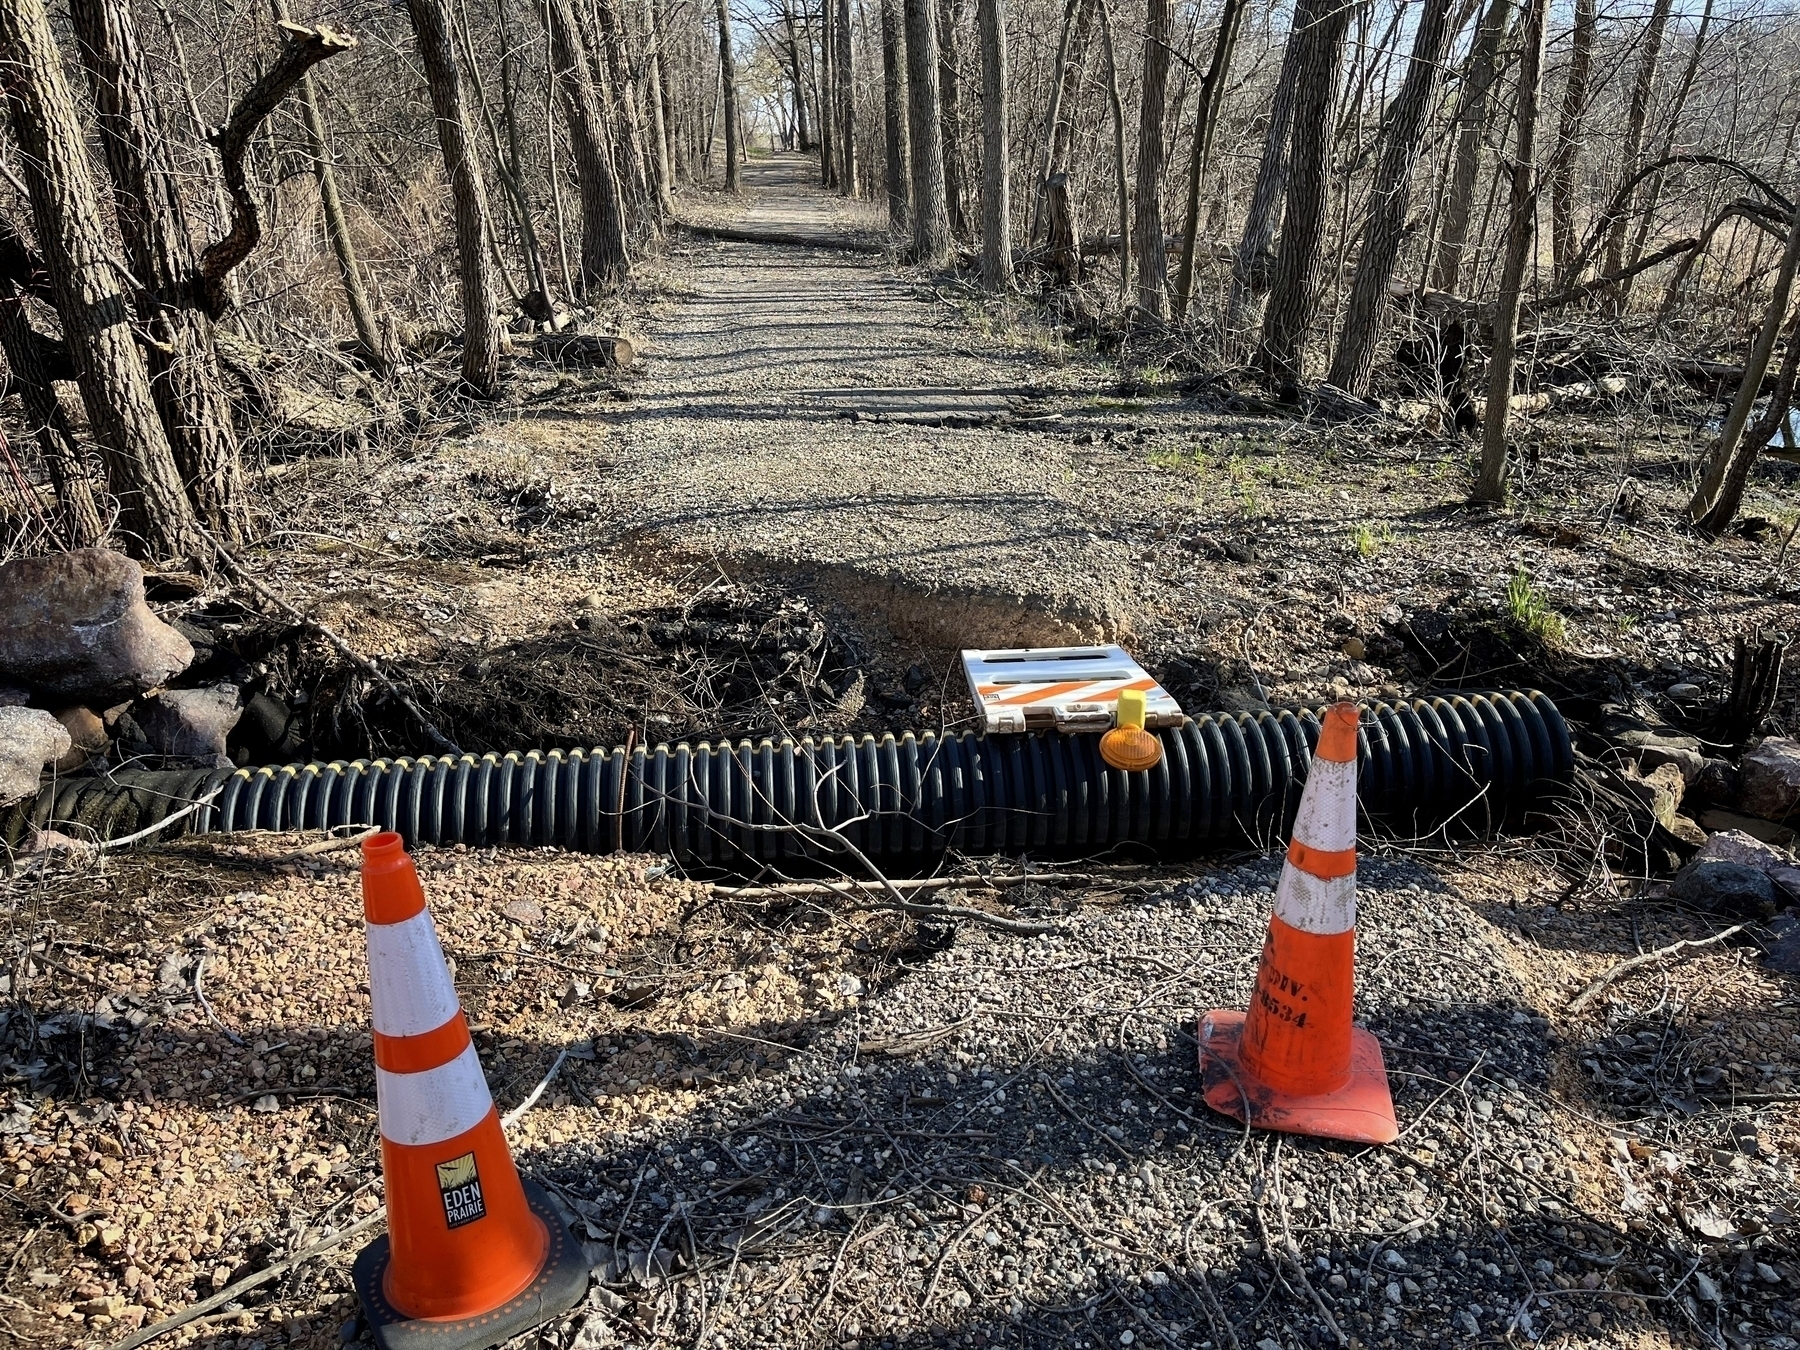 Traffic cones flank a corrugated pipe crossing a gravel trail in a wooded area, indicating ongoing maintenance or construction work.